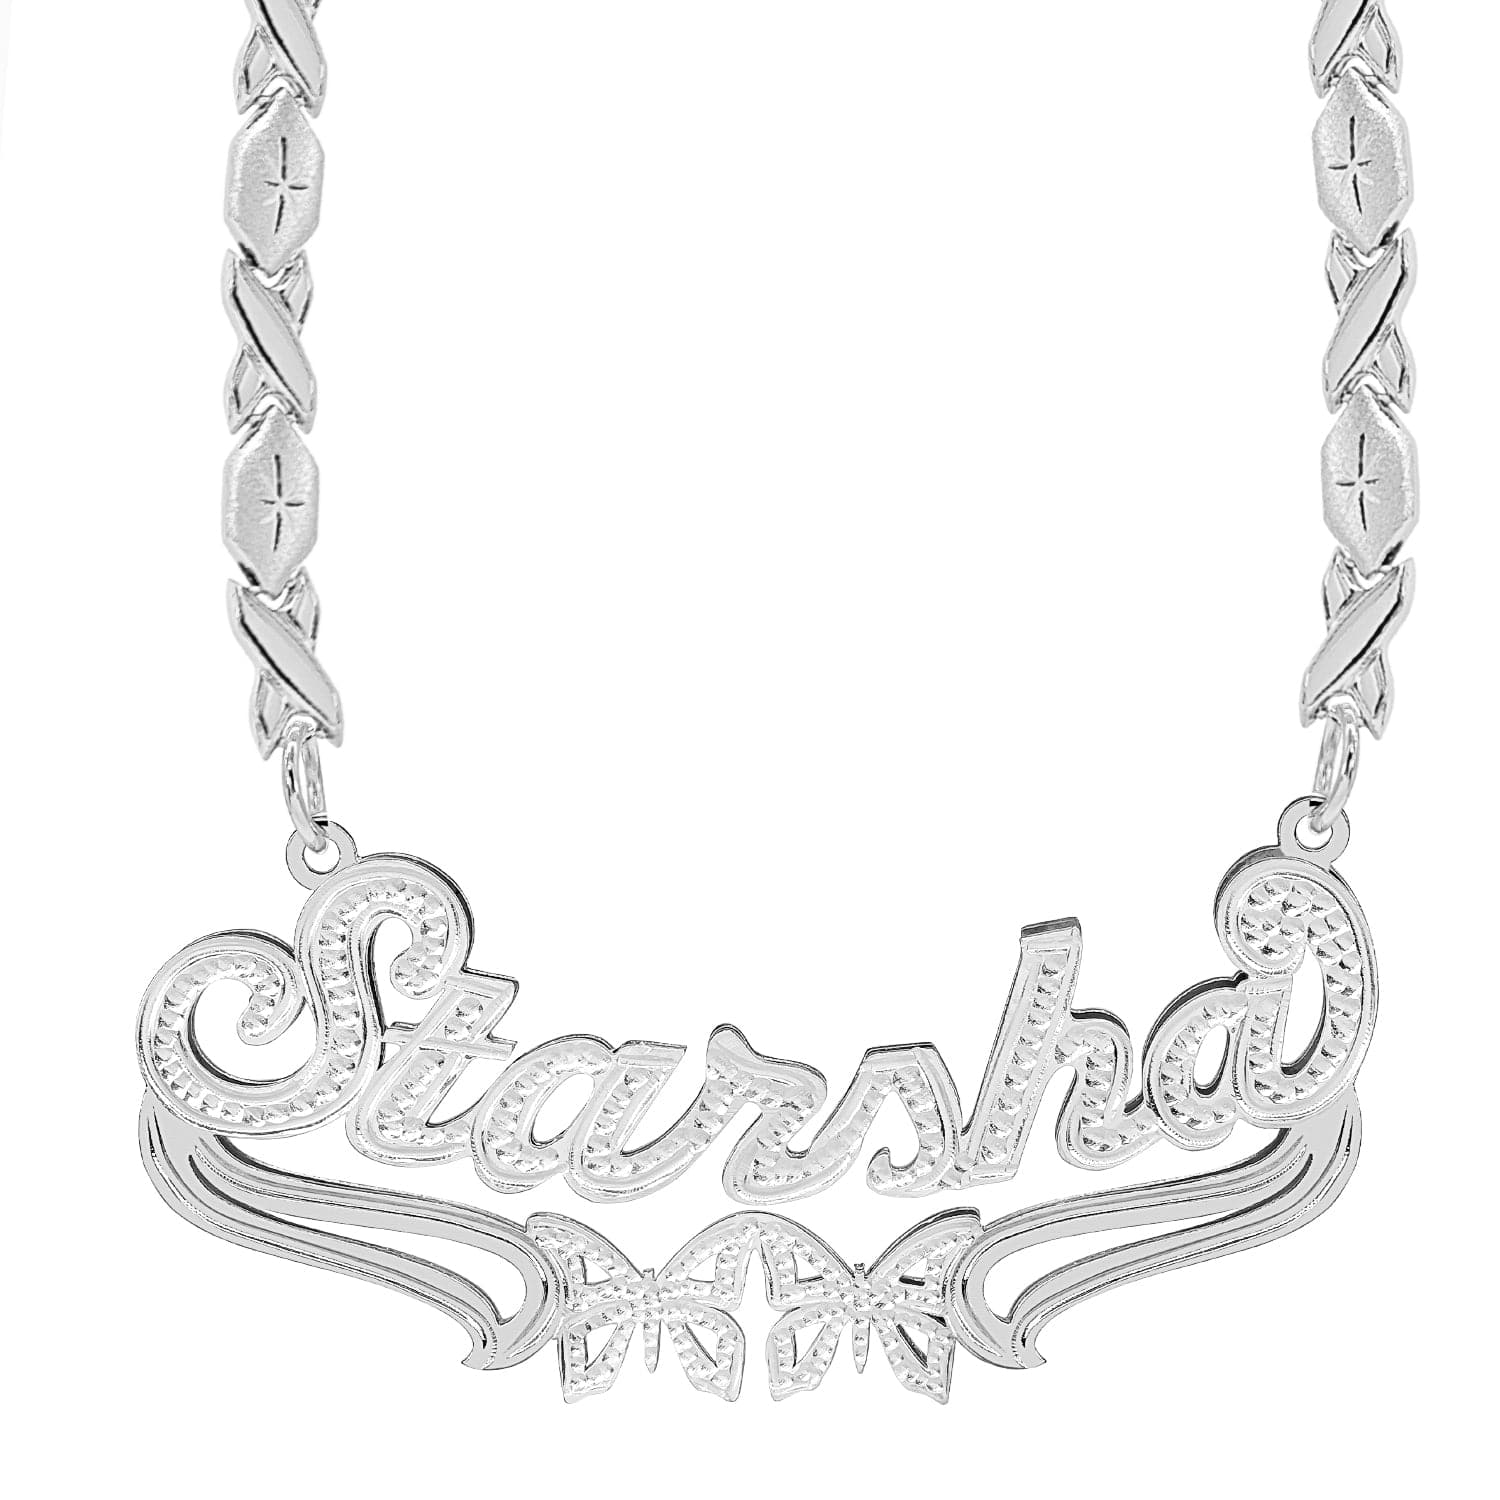 Two-Tone. Sterling Silver / Xoxo Chain Custom Double Plated Name Necklace "Starsha" with Xoxo chain